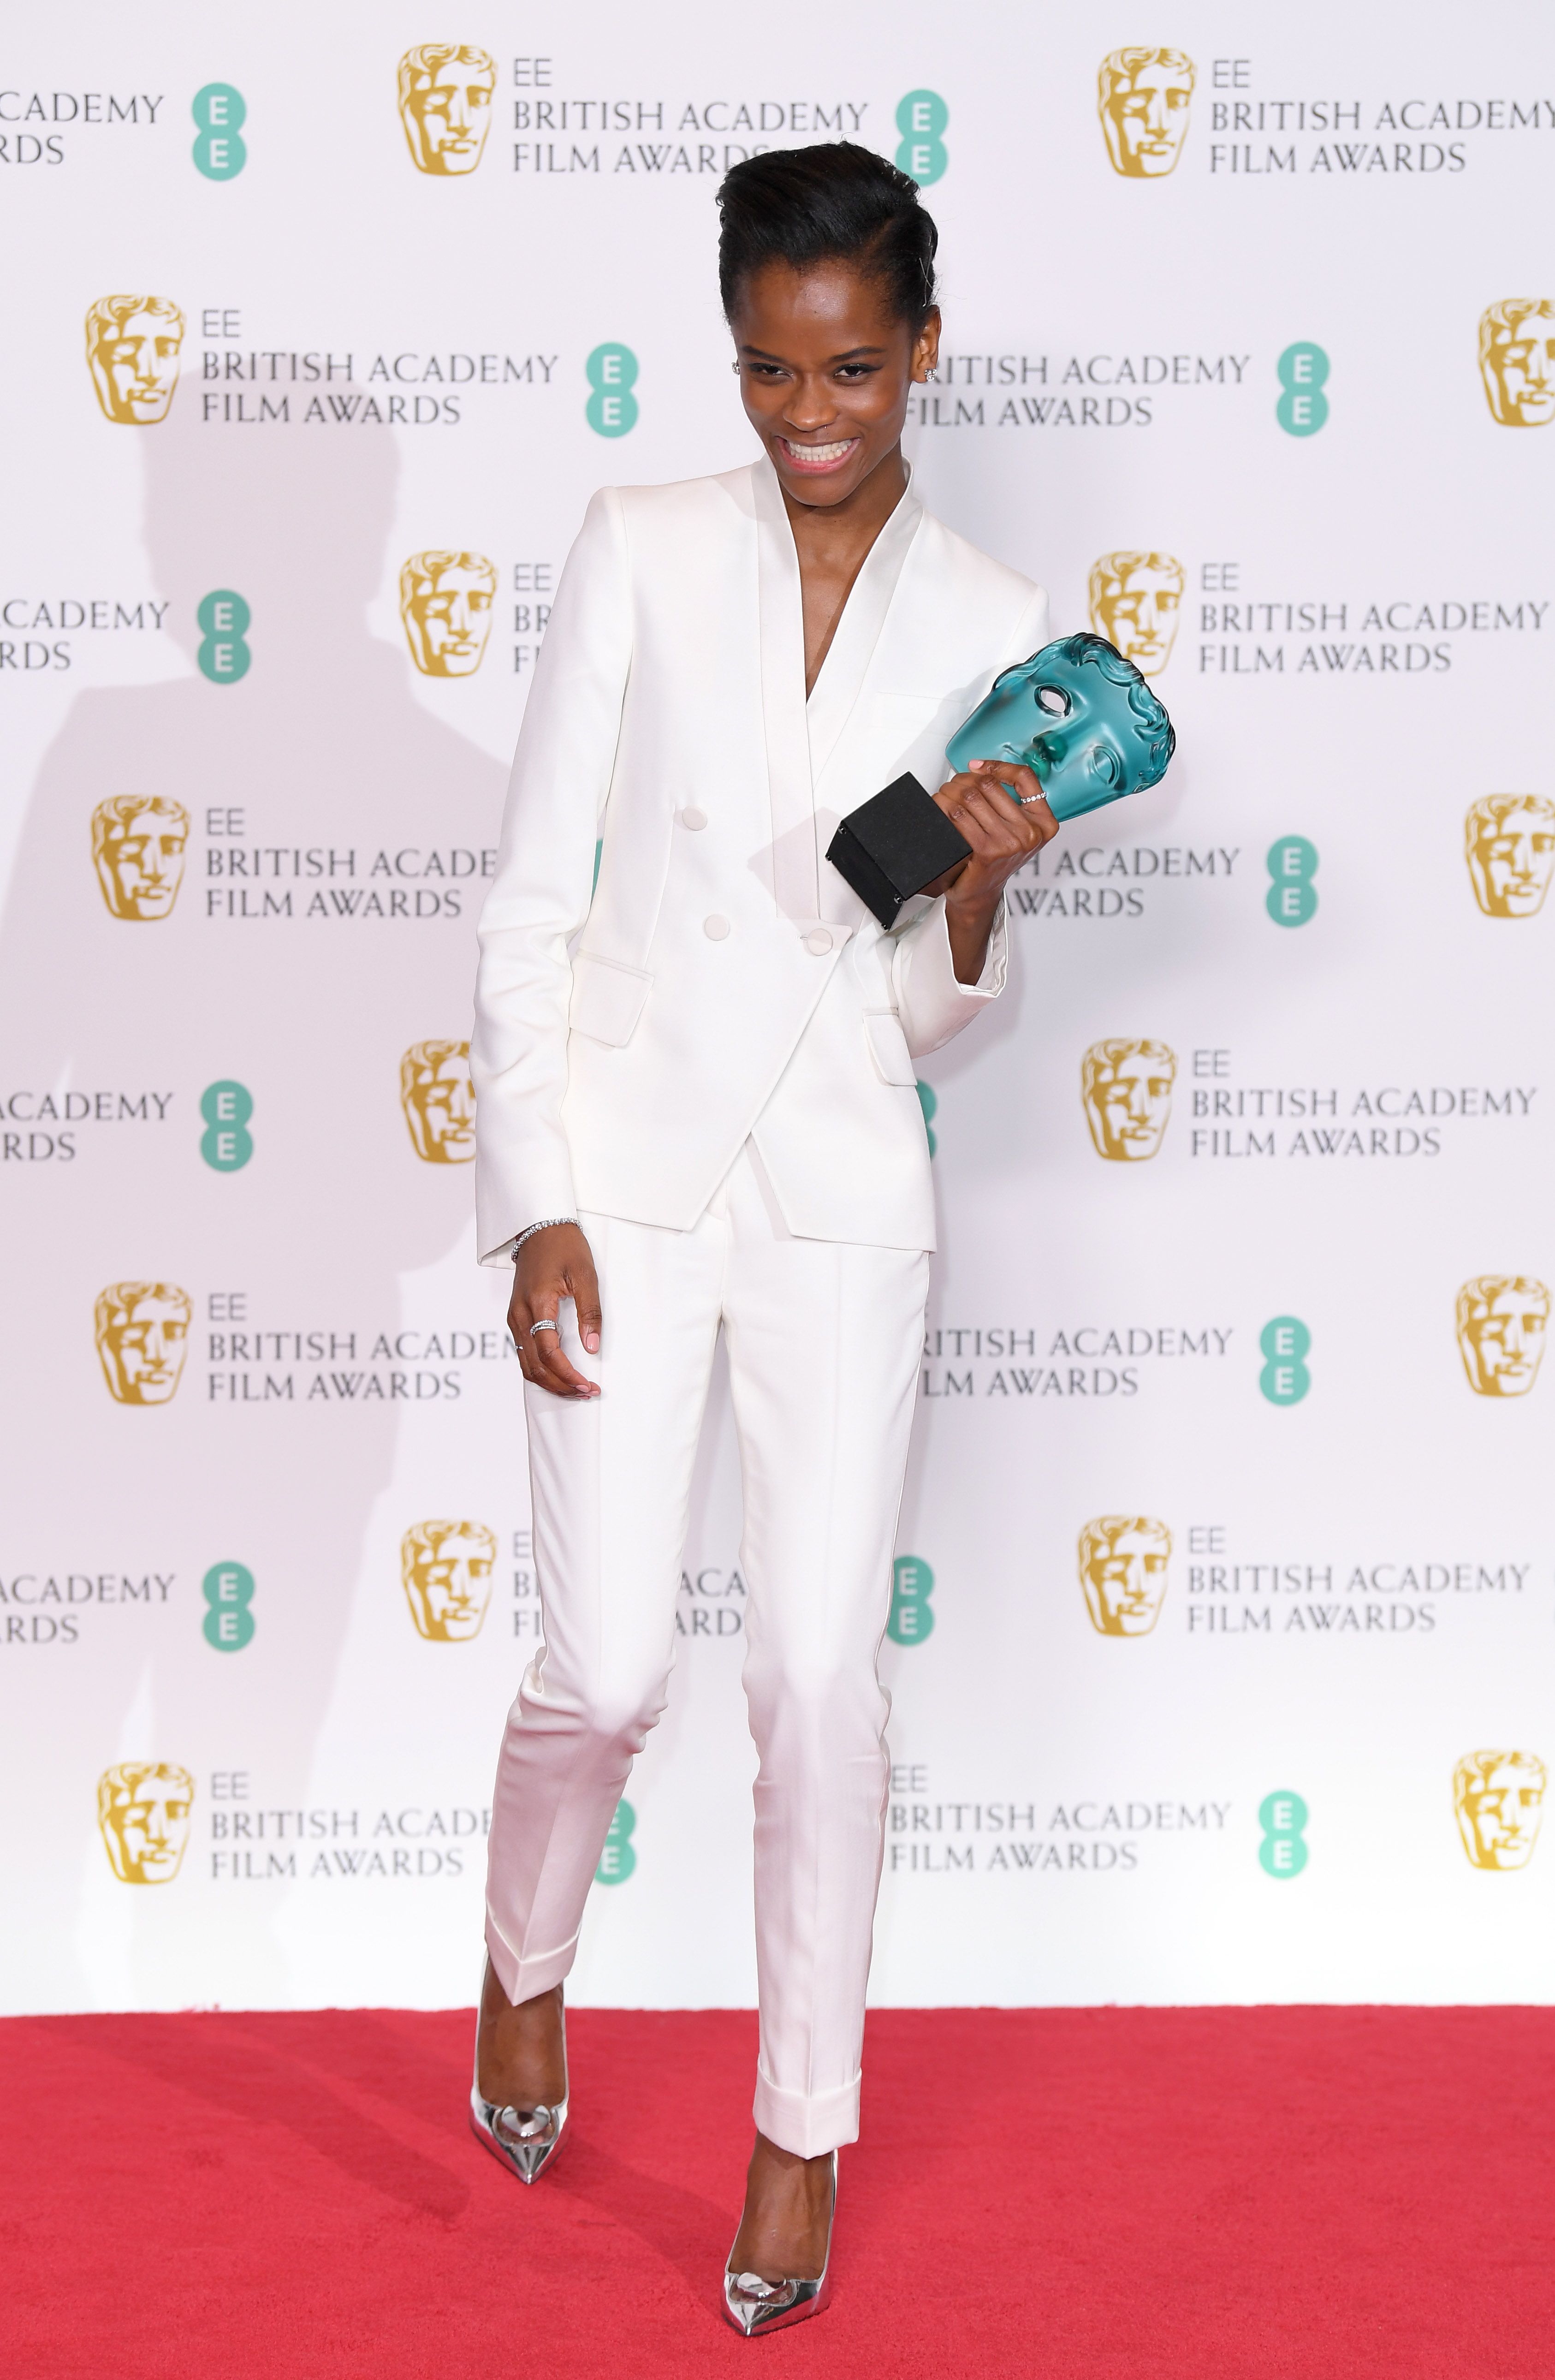 Women In Suits Dominated Red Carpets This Weekend - BAFTAs and Grammys Red Style